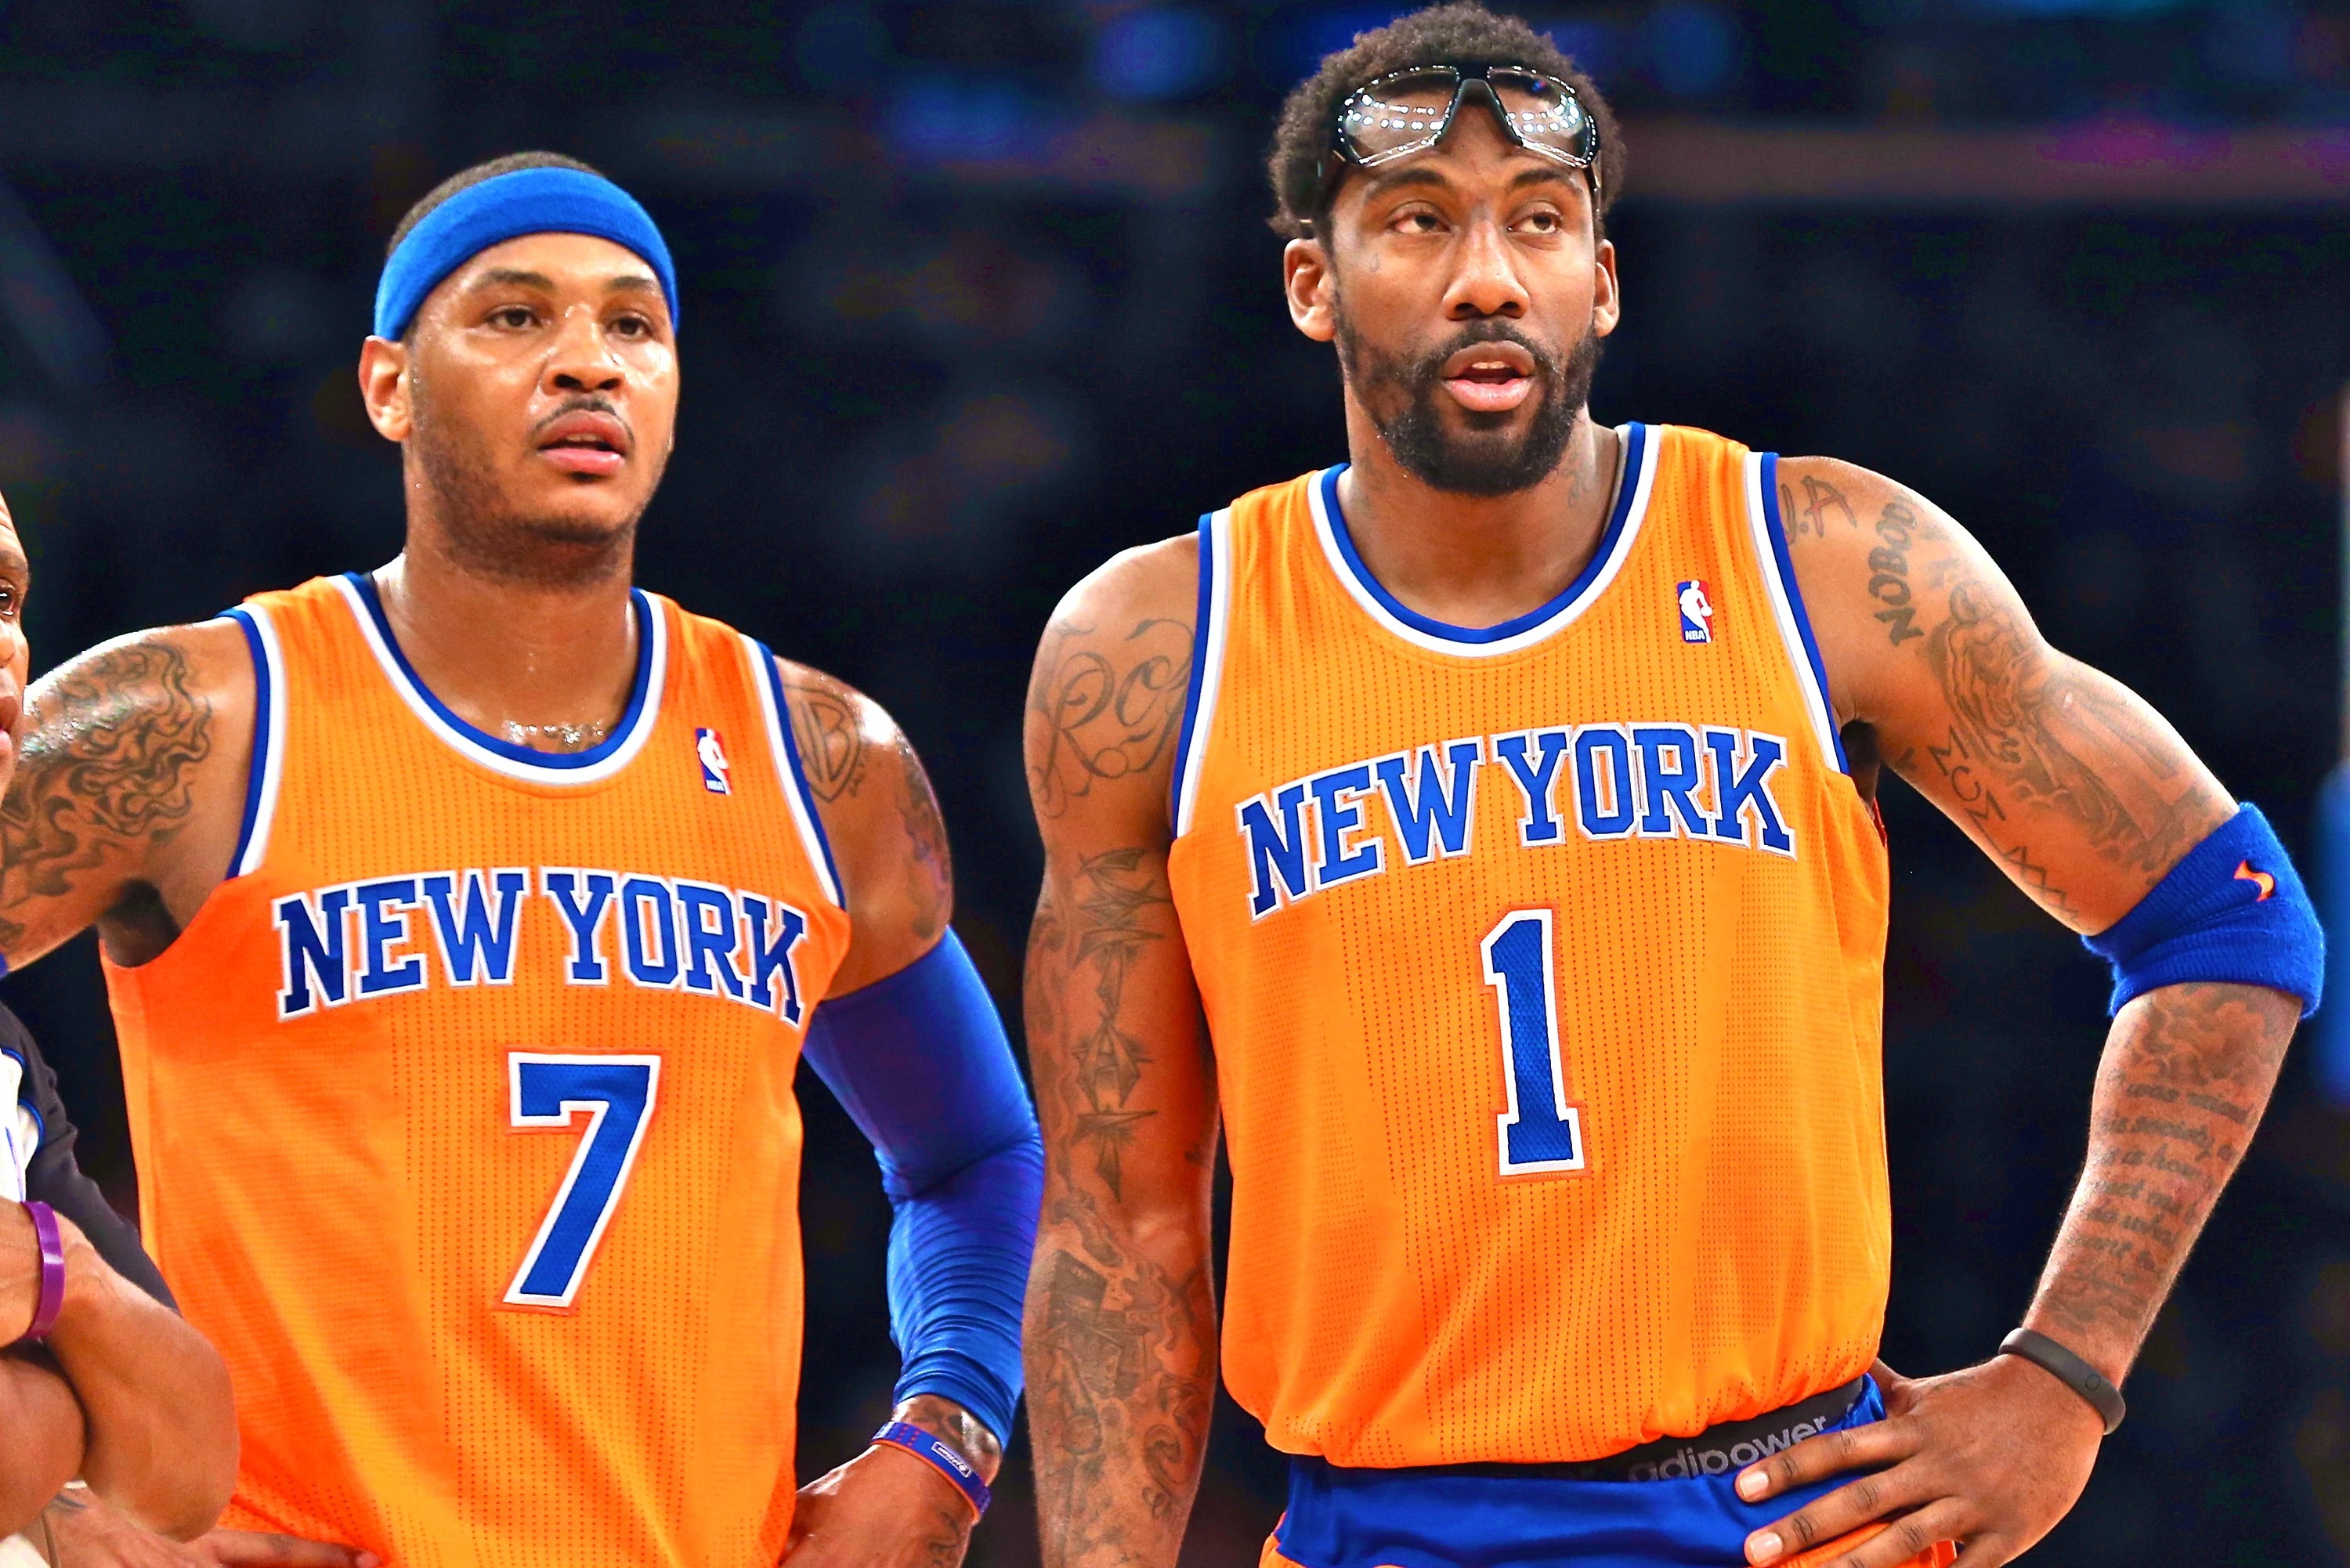 Orange & Green = Money To Me! 🤑 These Knick jerseys with some